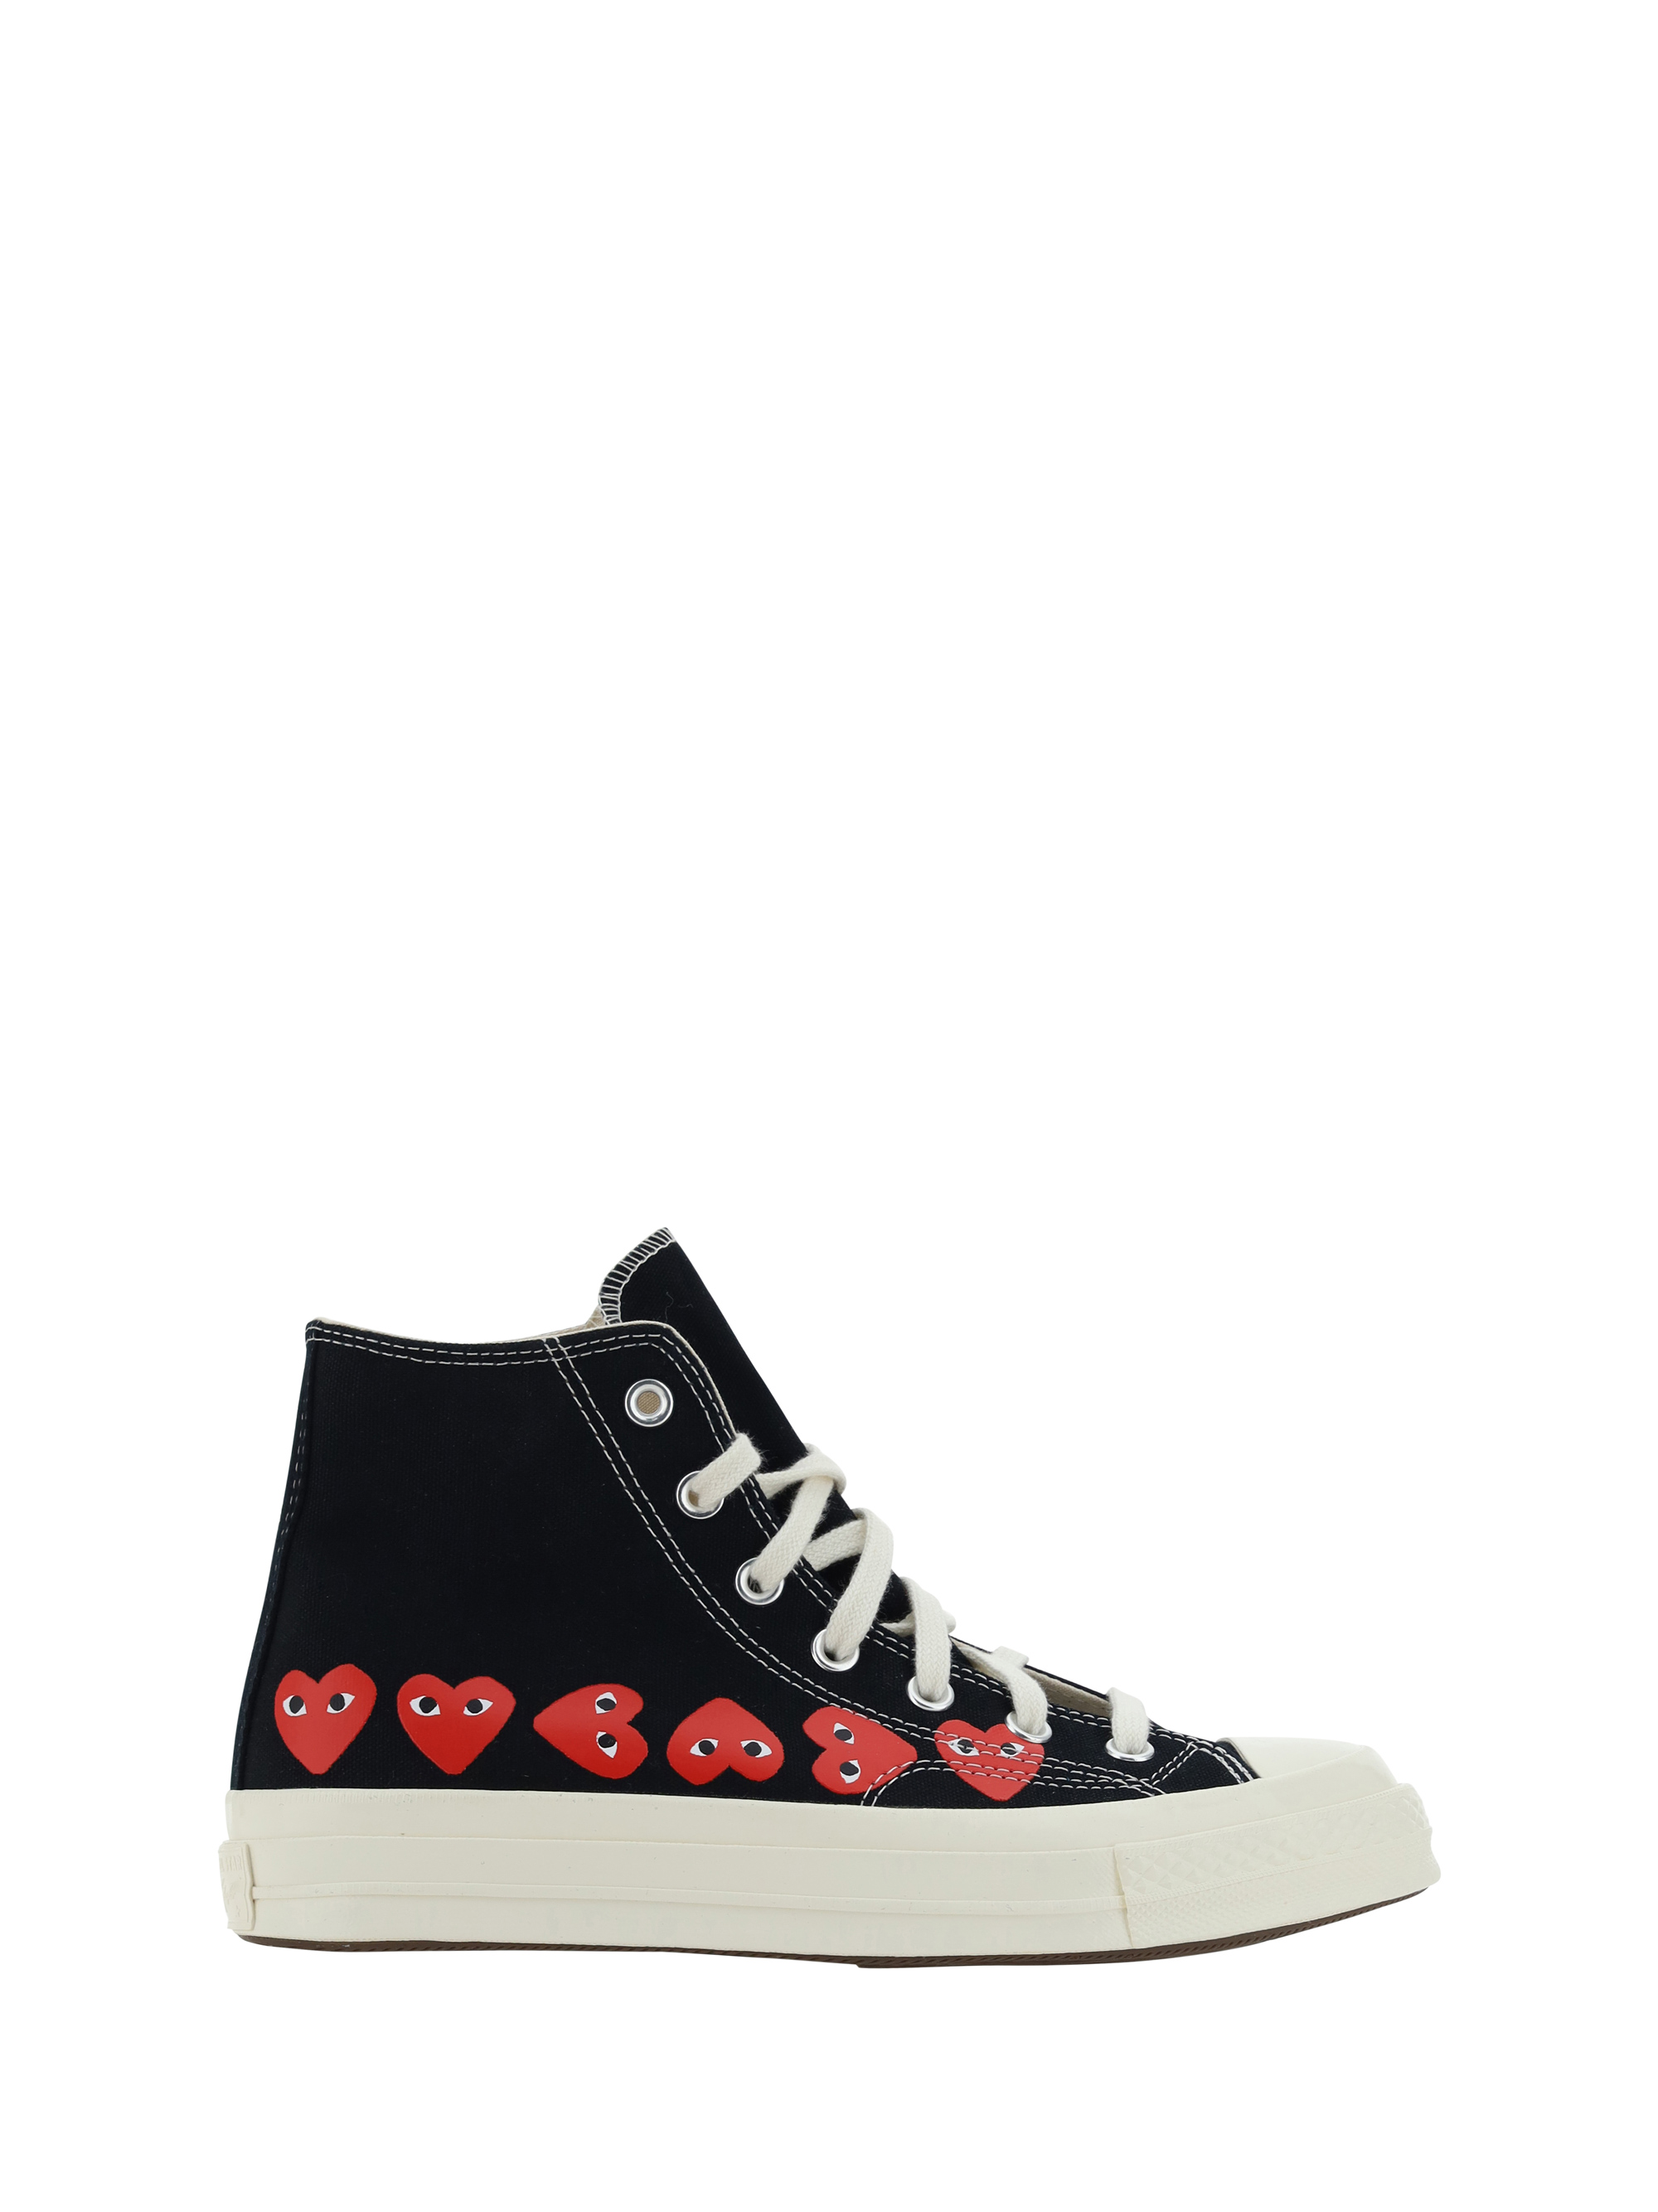 Comme Des Garçons Play X Converse Multi Heart High Sneakers In Black